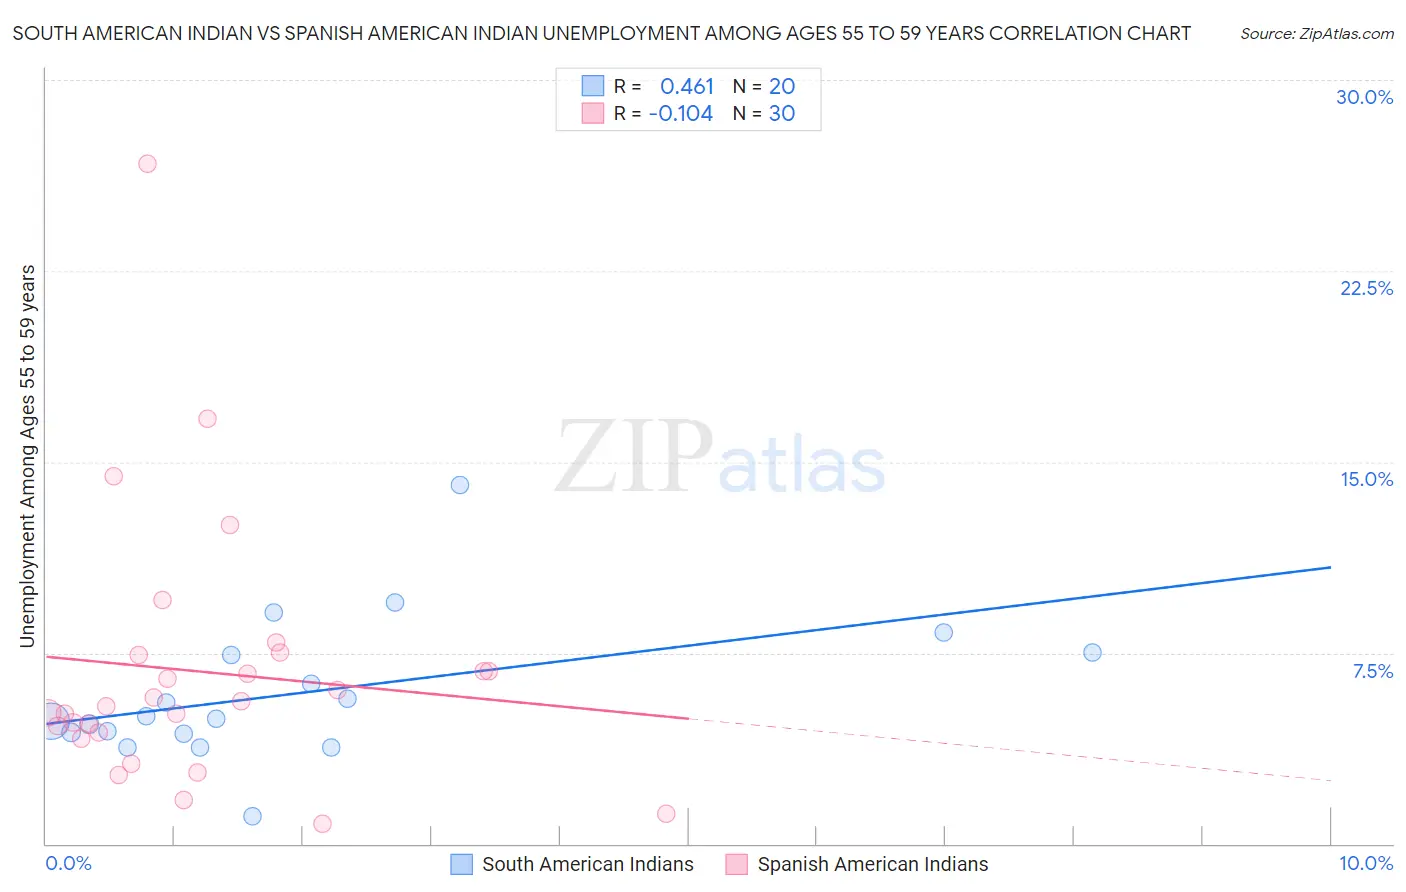 South American Indian vs Spanish American Indian Unemployment Among Ages 55 to 59 years